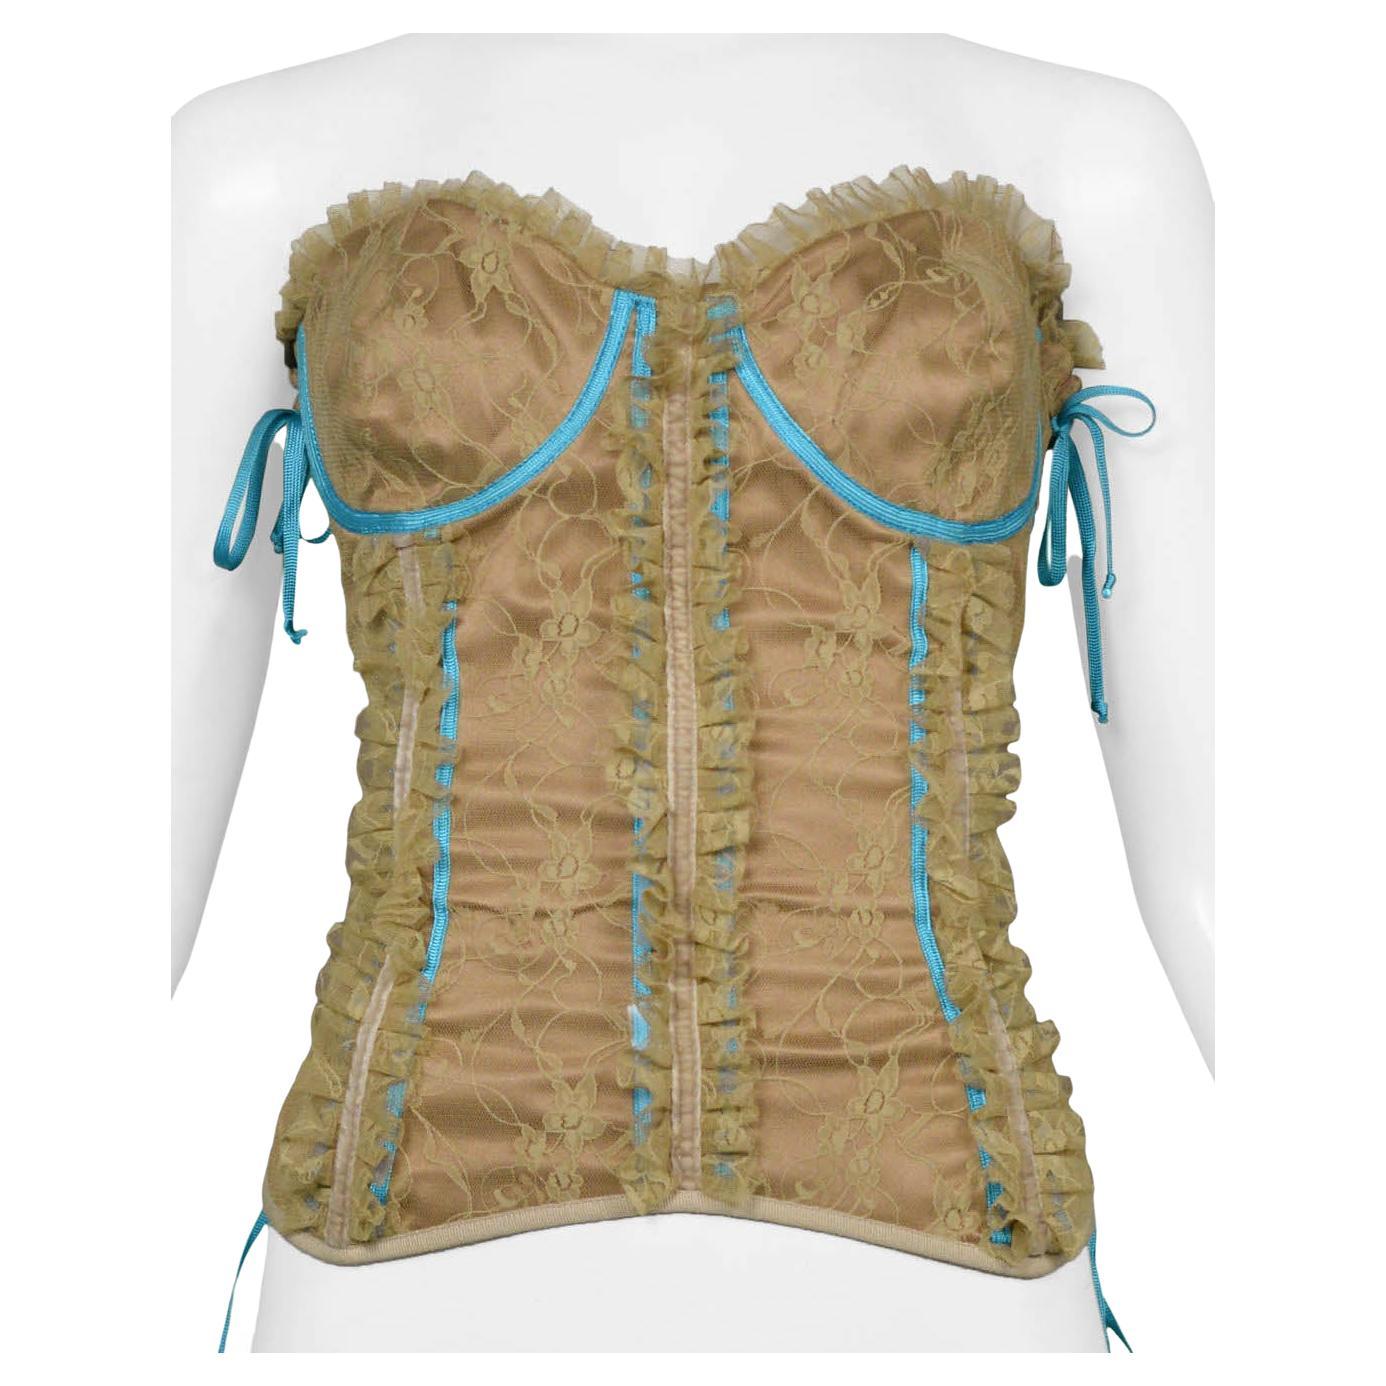 Dolce & Gabbana Lace Corset Top With Blue Laces 2002